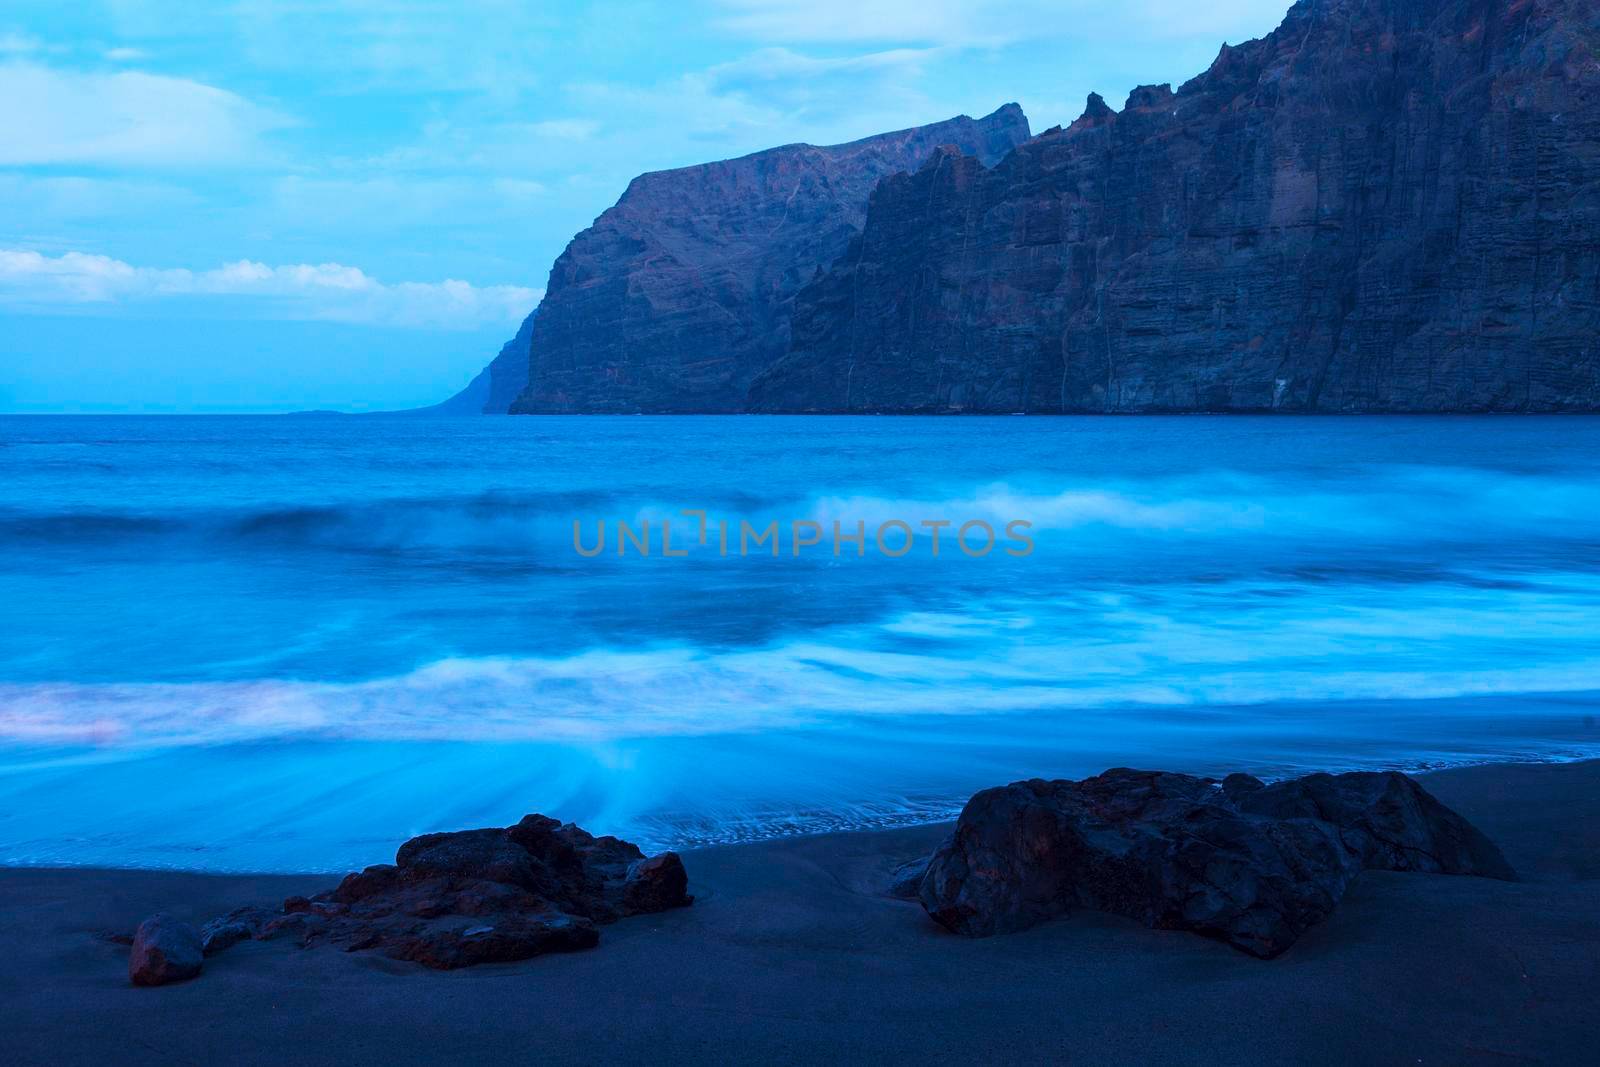 The cliffs of Los Gigantes at dawn by benkrut